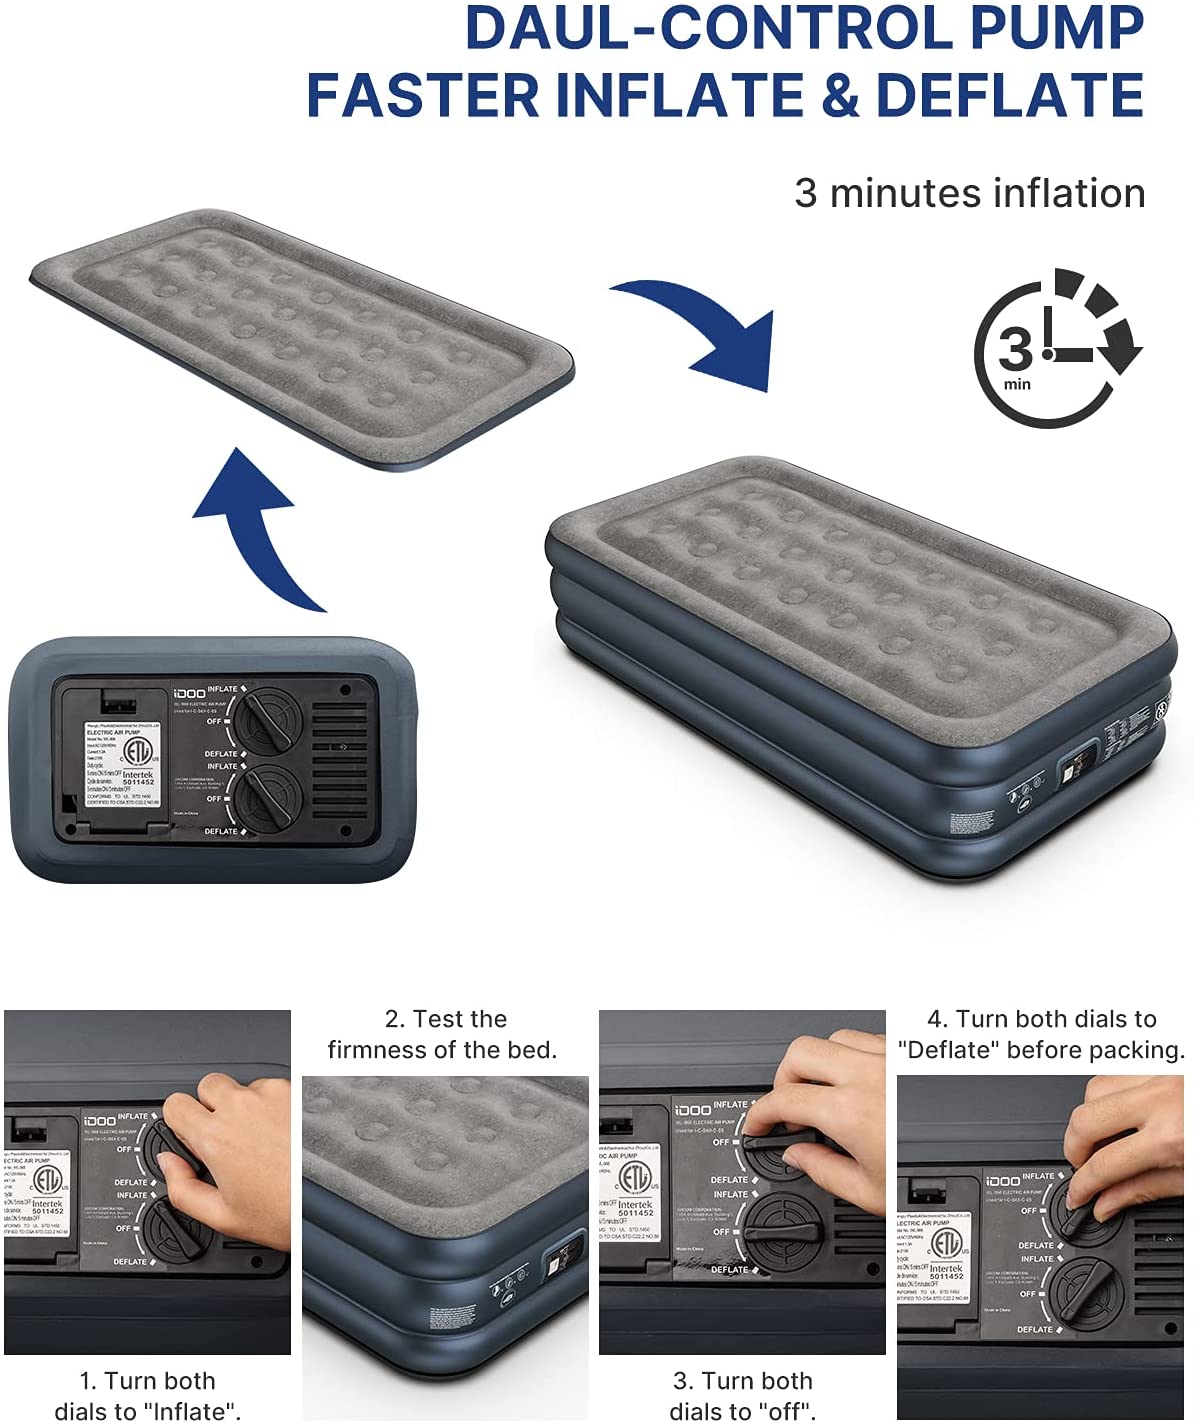 Twin Size 18" Air Mattress Premium+ - _wf_cus Air Bed Best Seller Best Seller_AU fathersday Twin by idoogroup